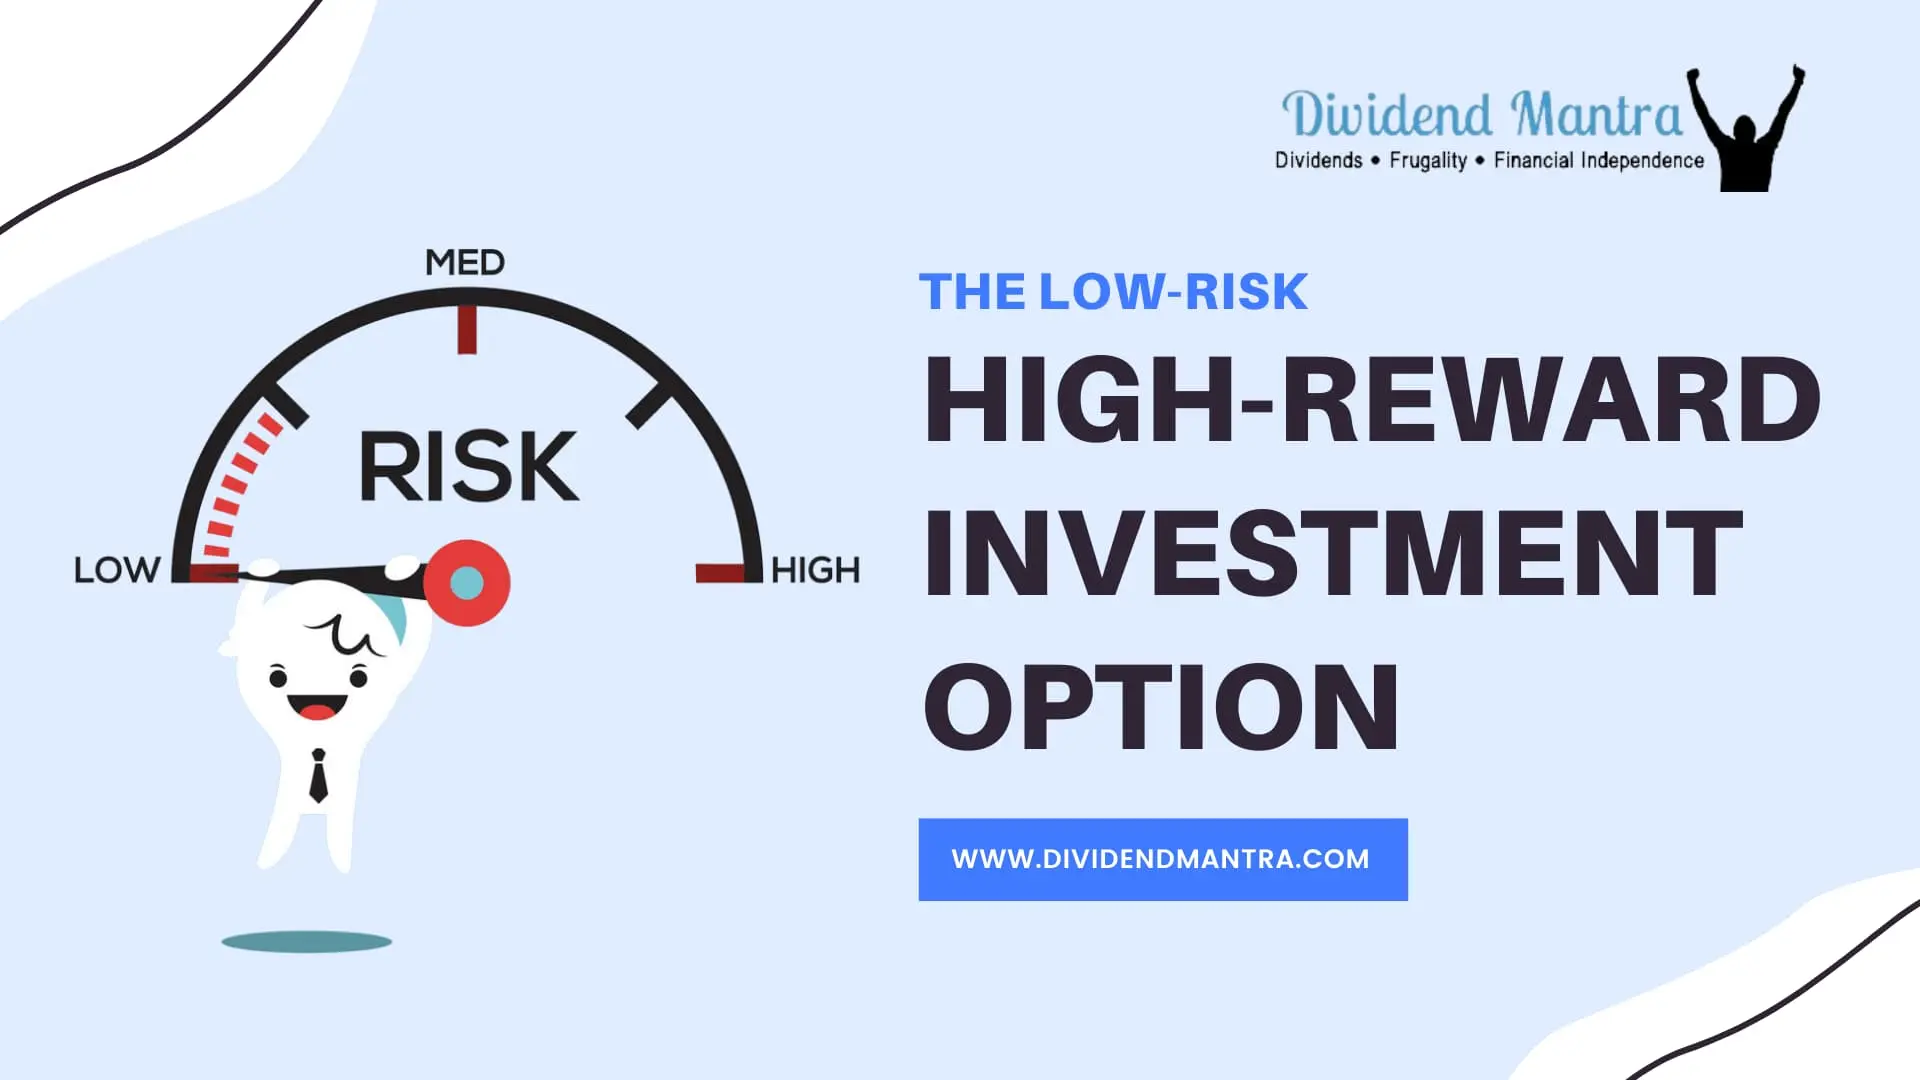 The Low-Risk, High-Reward Investment Options